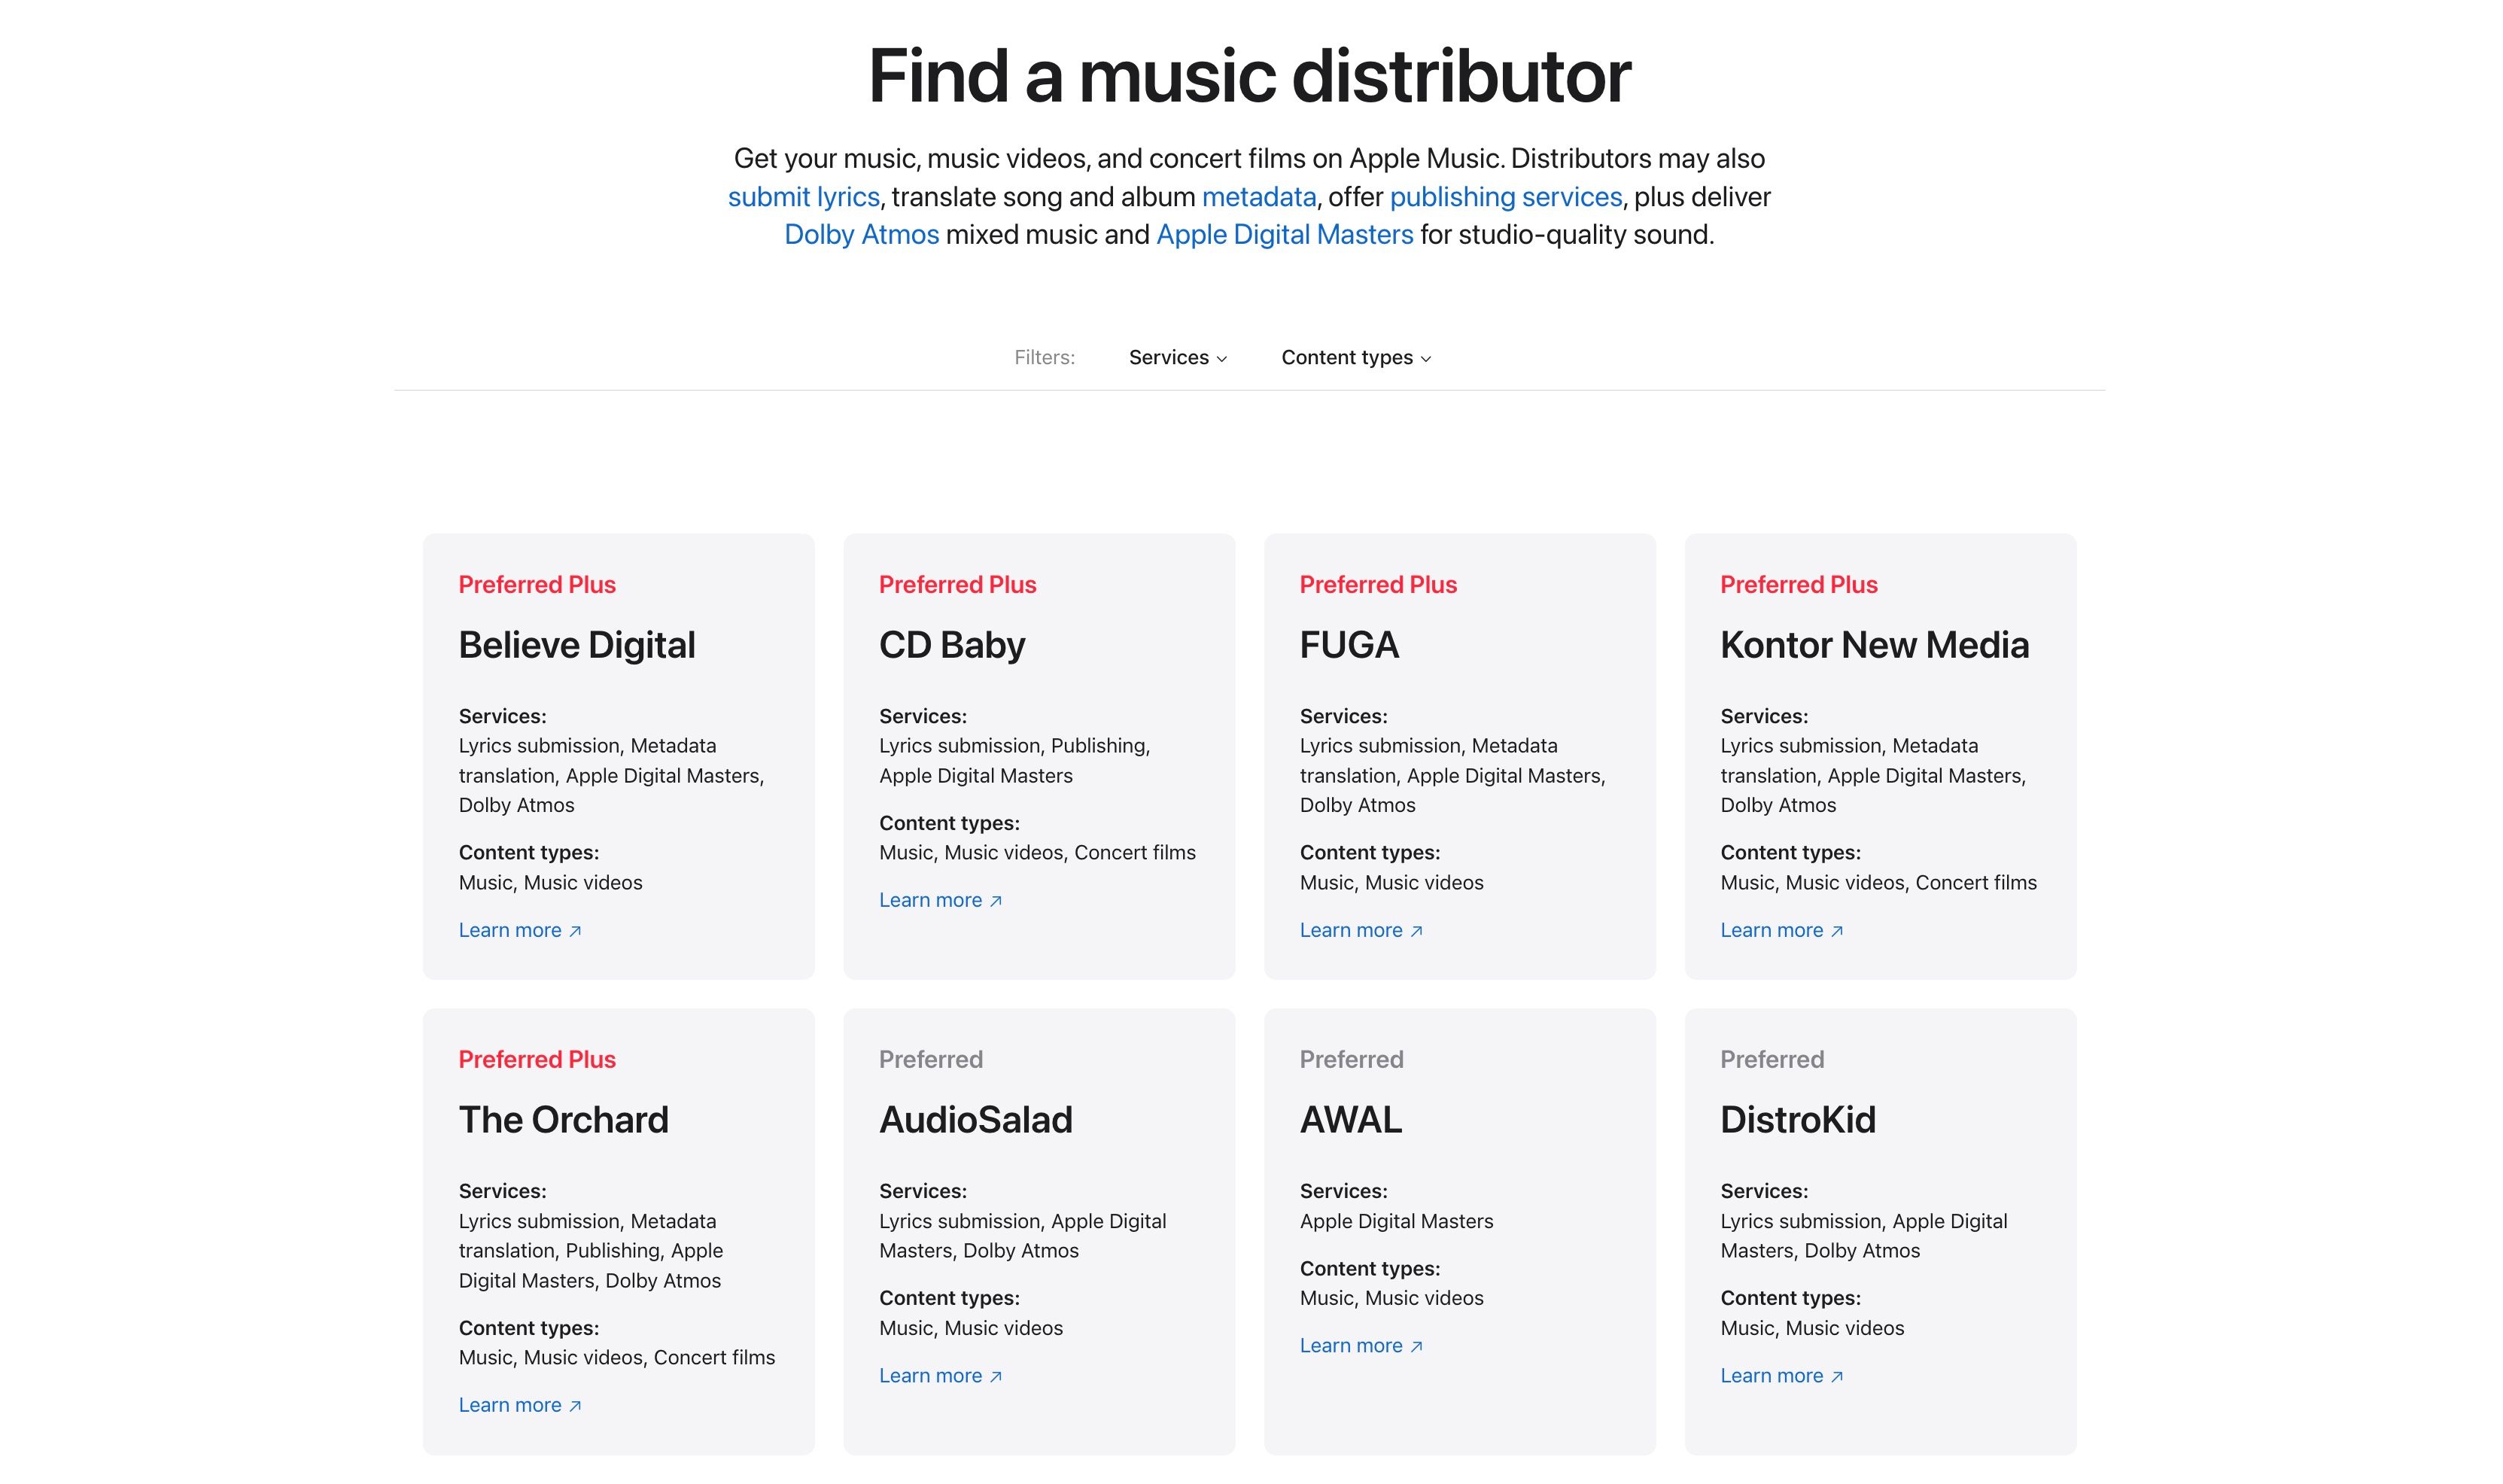 A list of Apple preferred music distributors from the Apple support page.